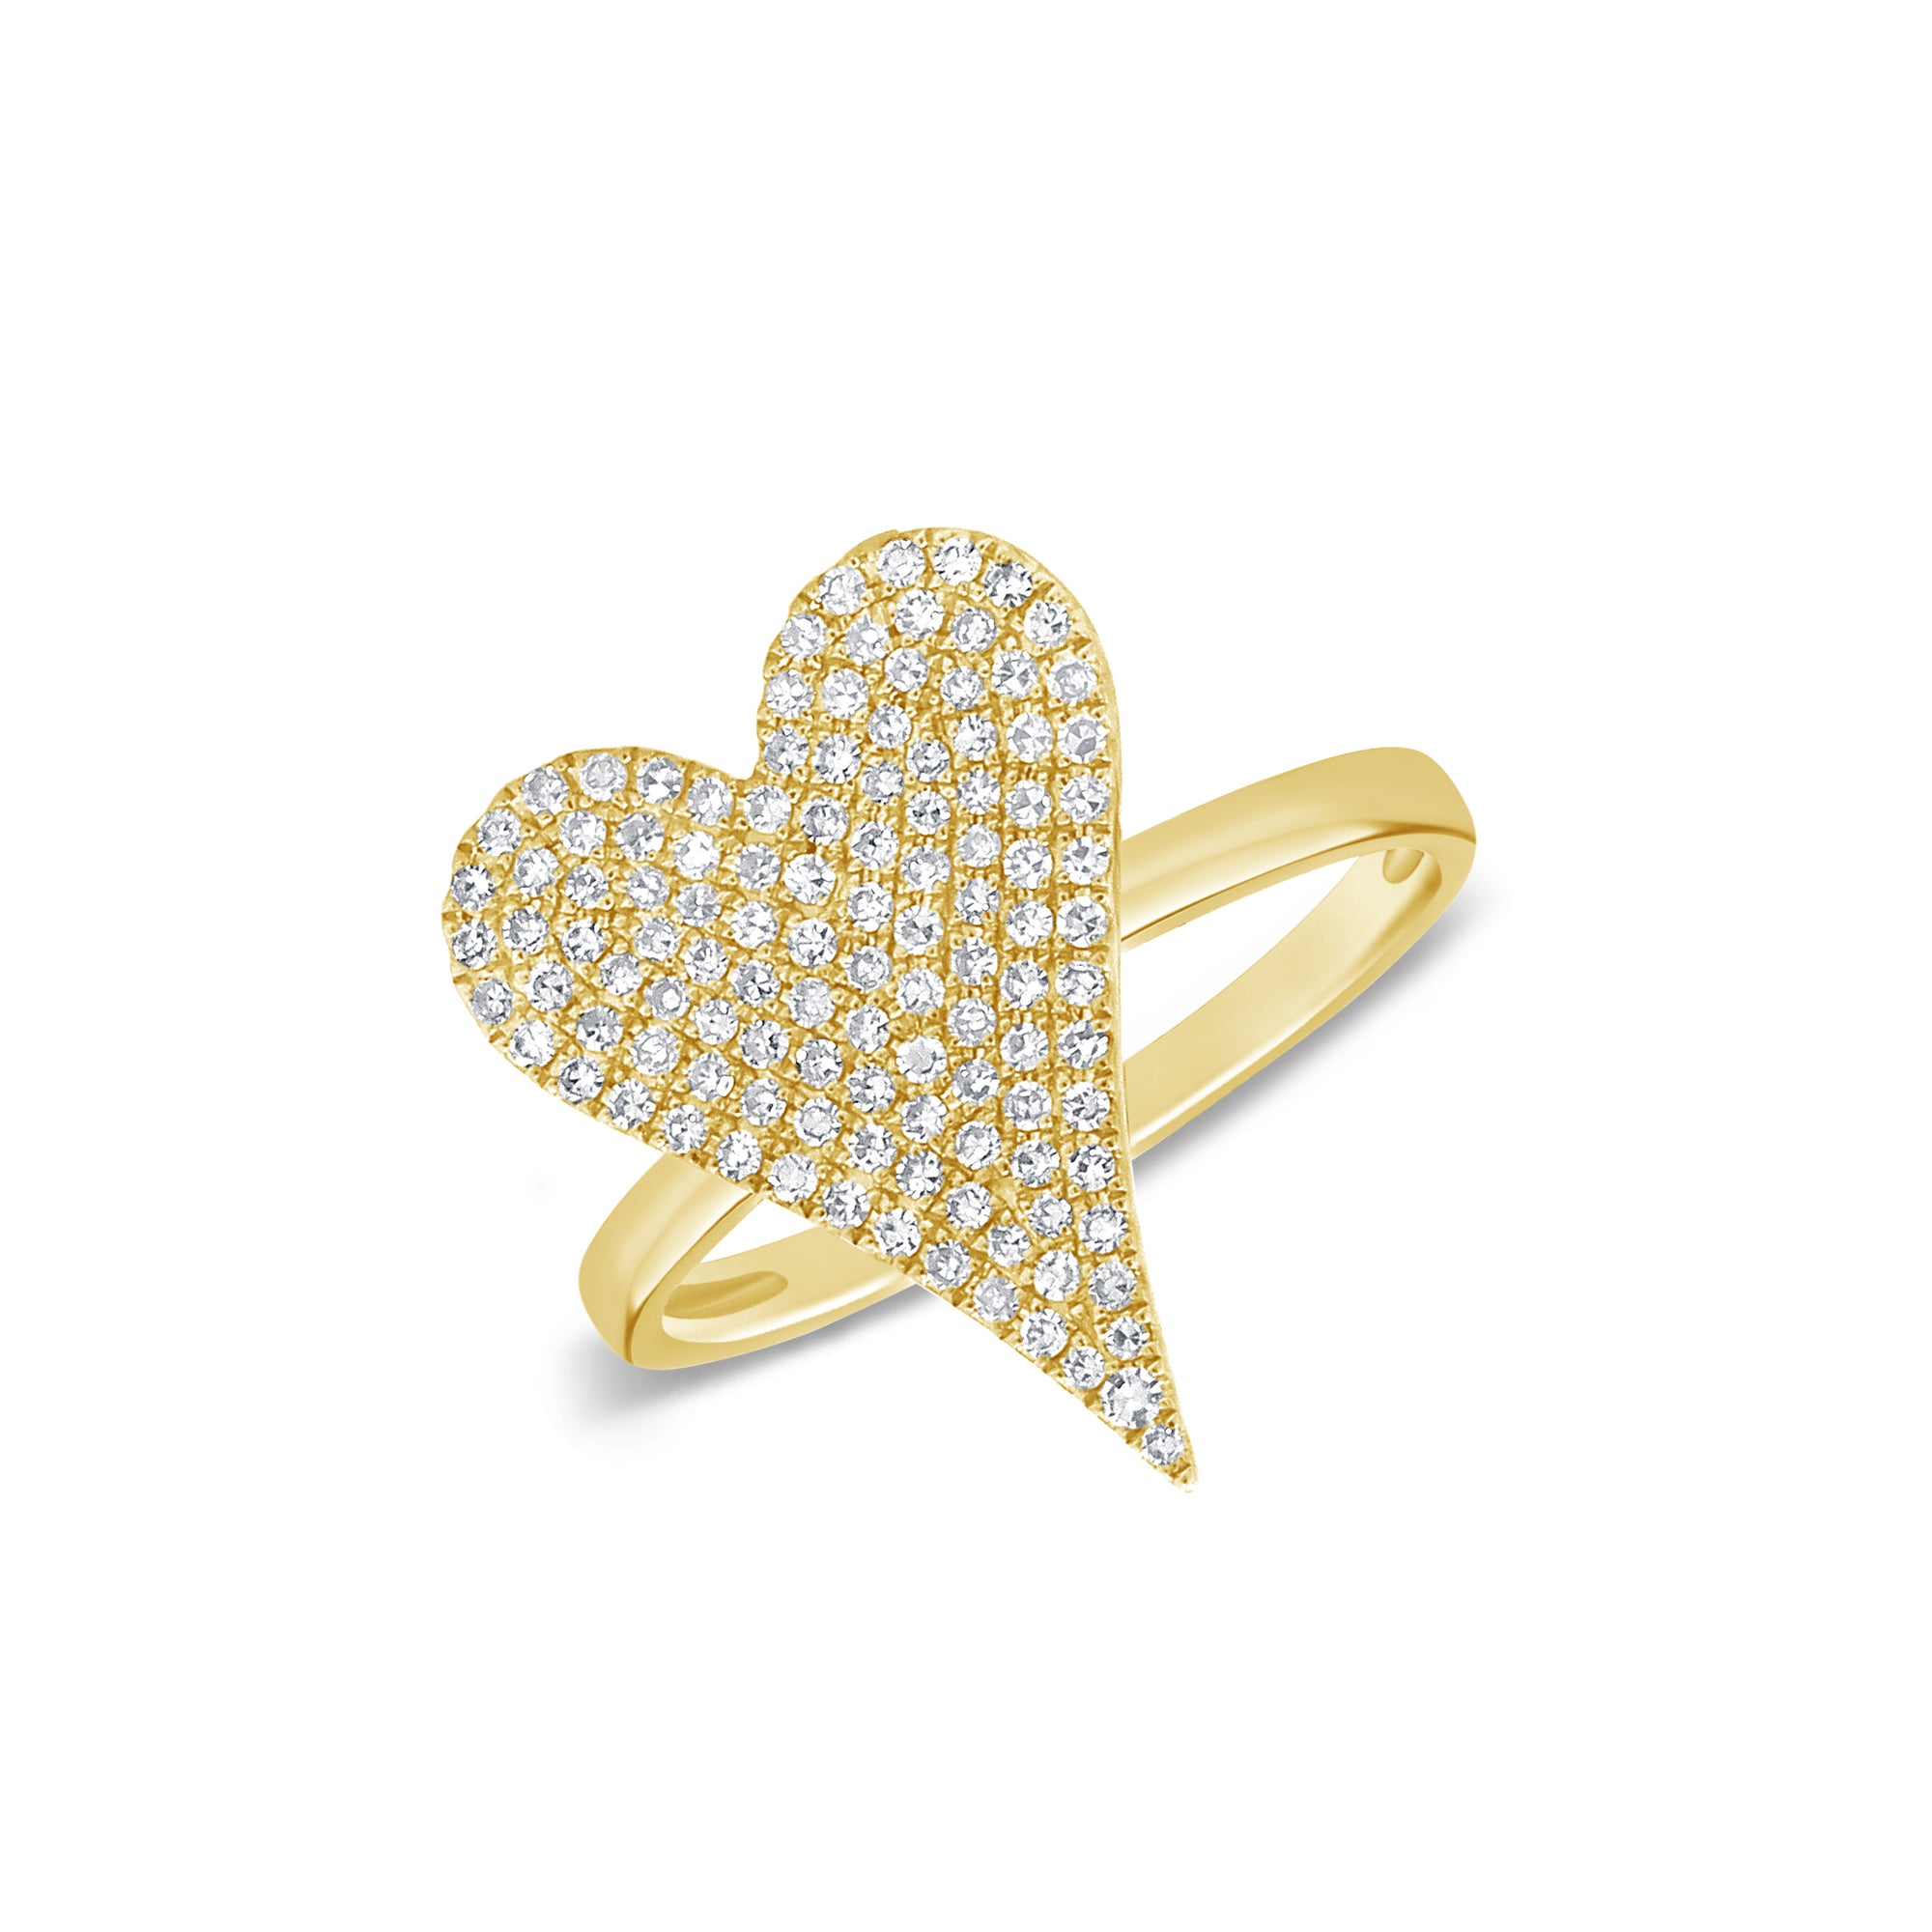 Pave Diamond Pointed Heart Ring  - 14K gold weighing 3.30 grams  - 116 round diamonds totaling 0.39 carats